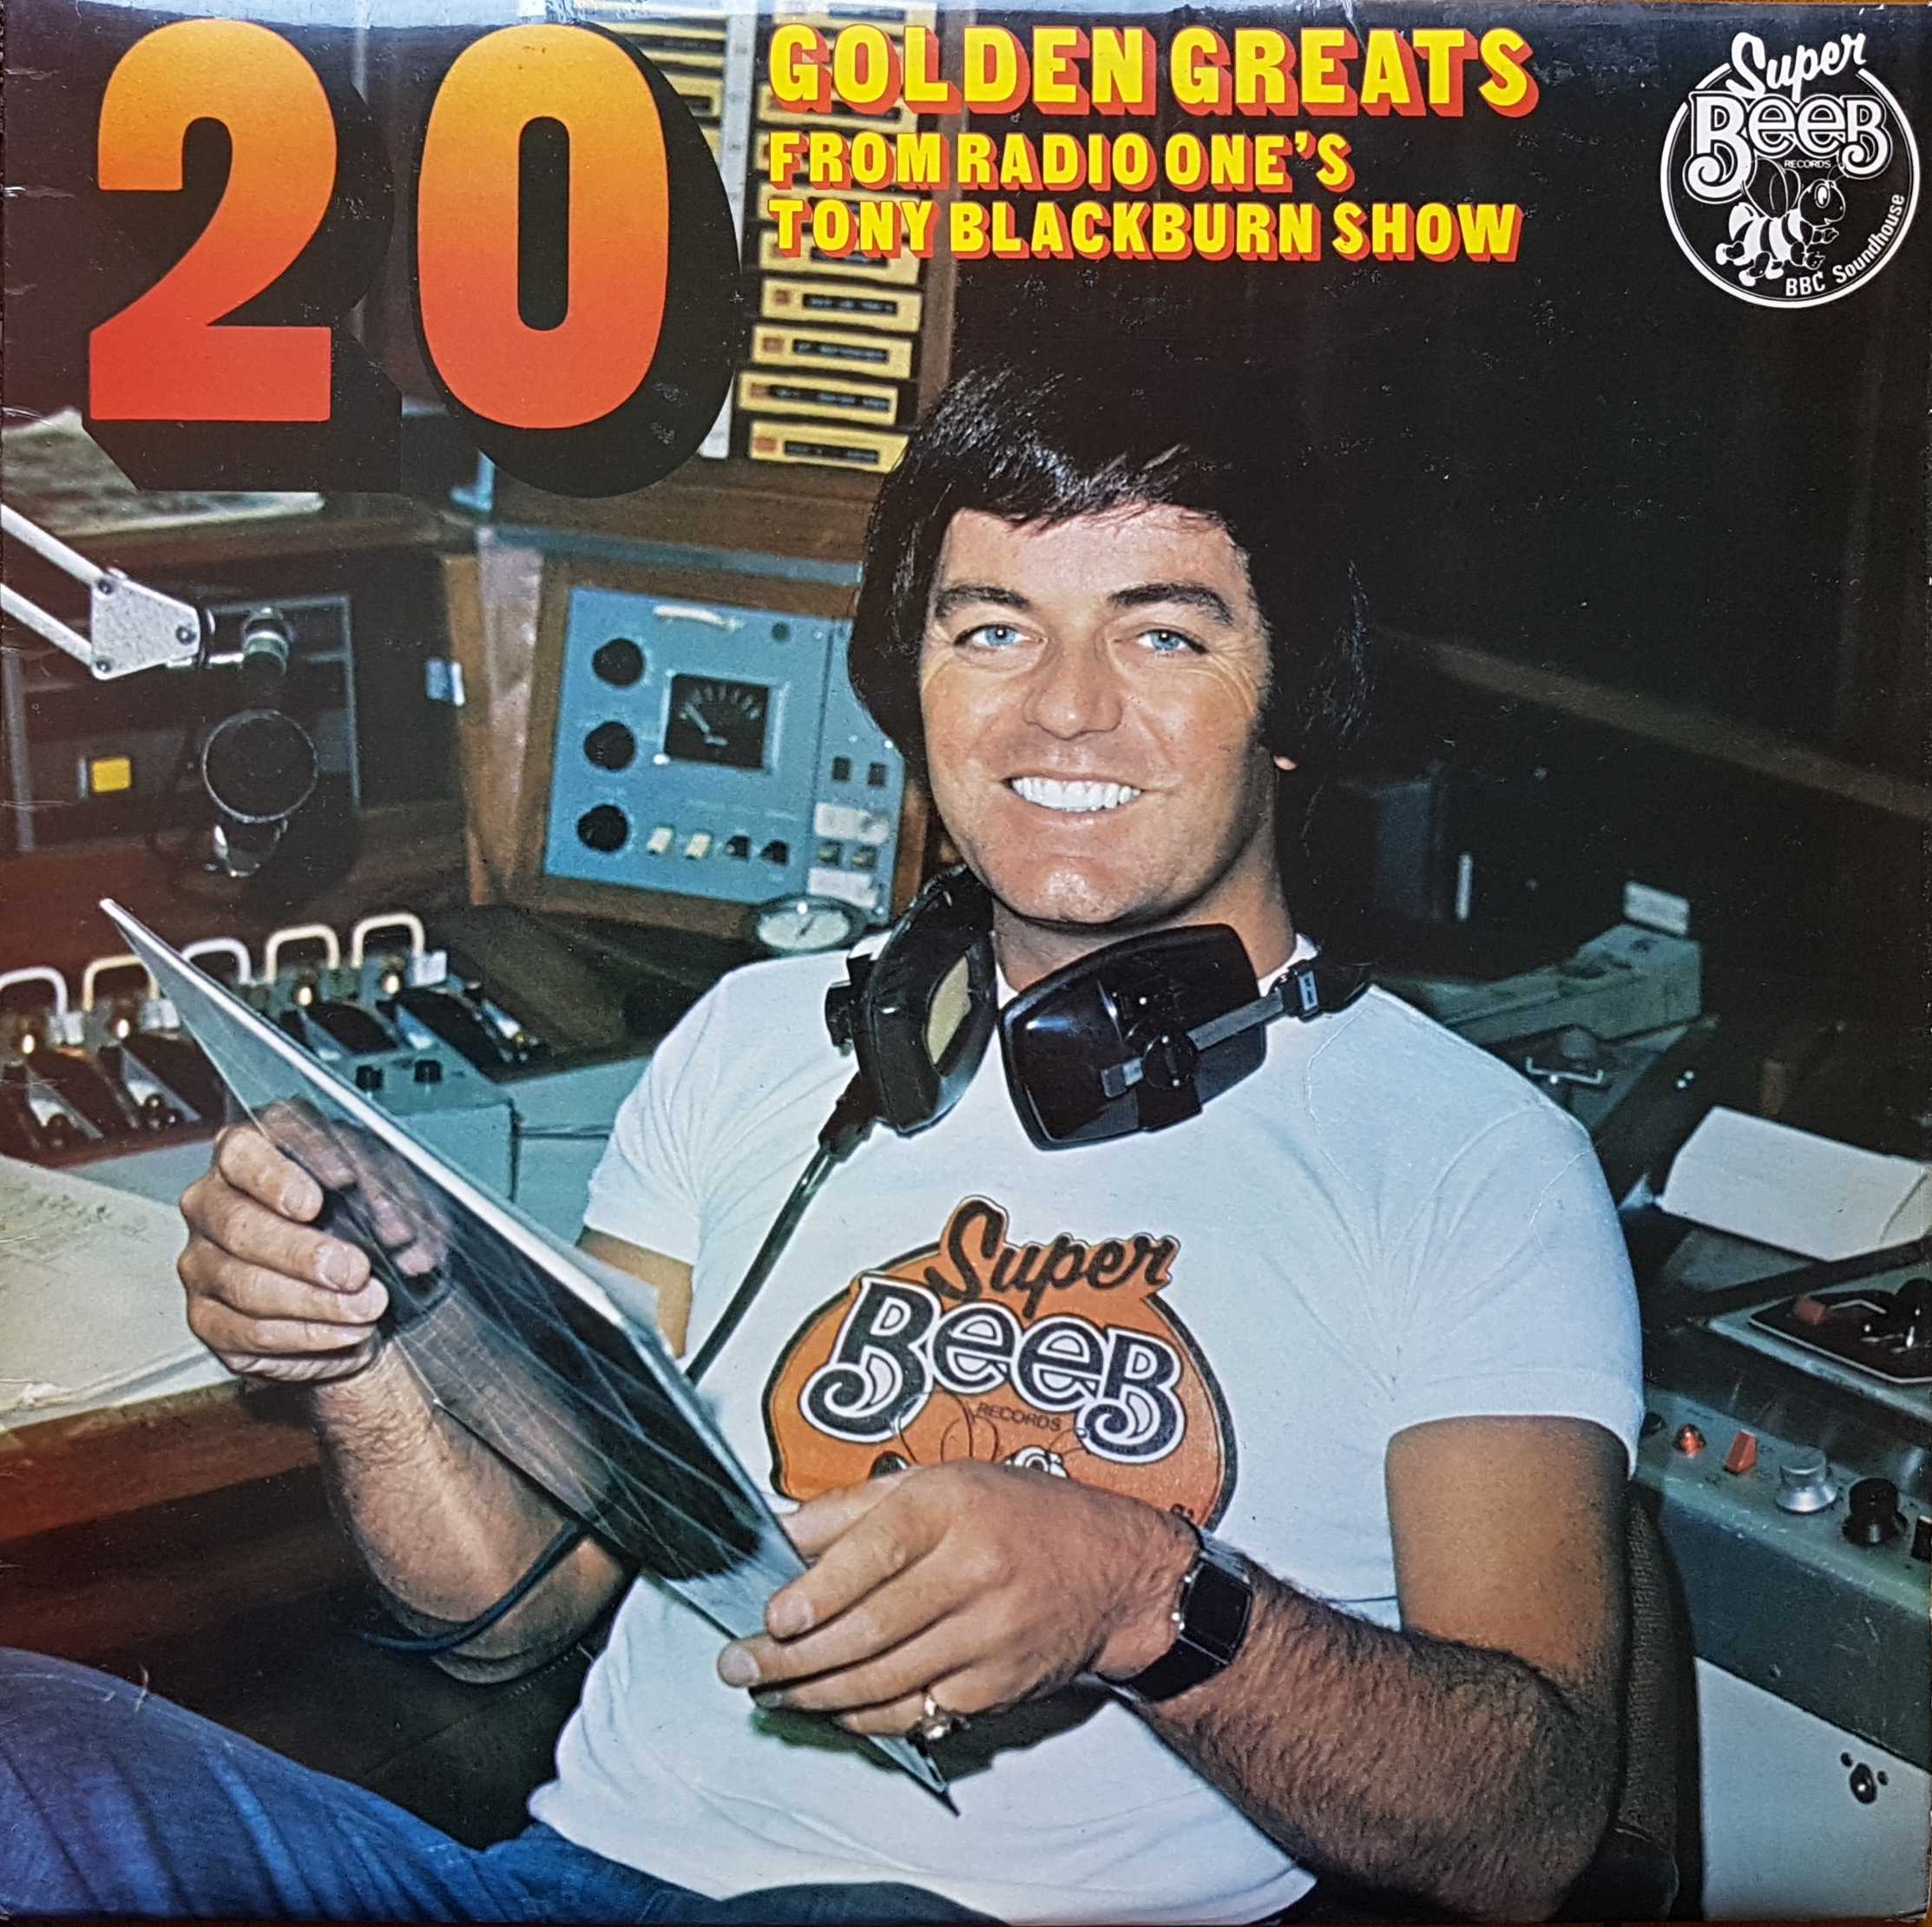 Picture of 20 golden greats from Radio 1s Tony Blackburn show by artist Various from the BBC albums - Records and Tapes library